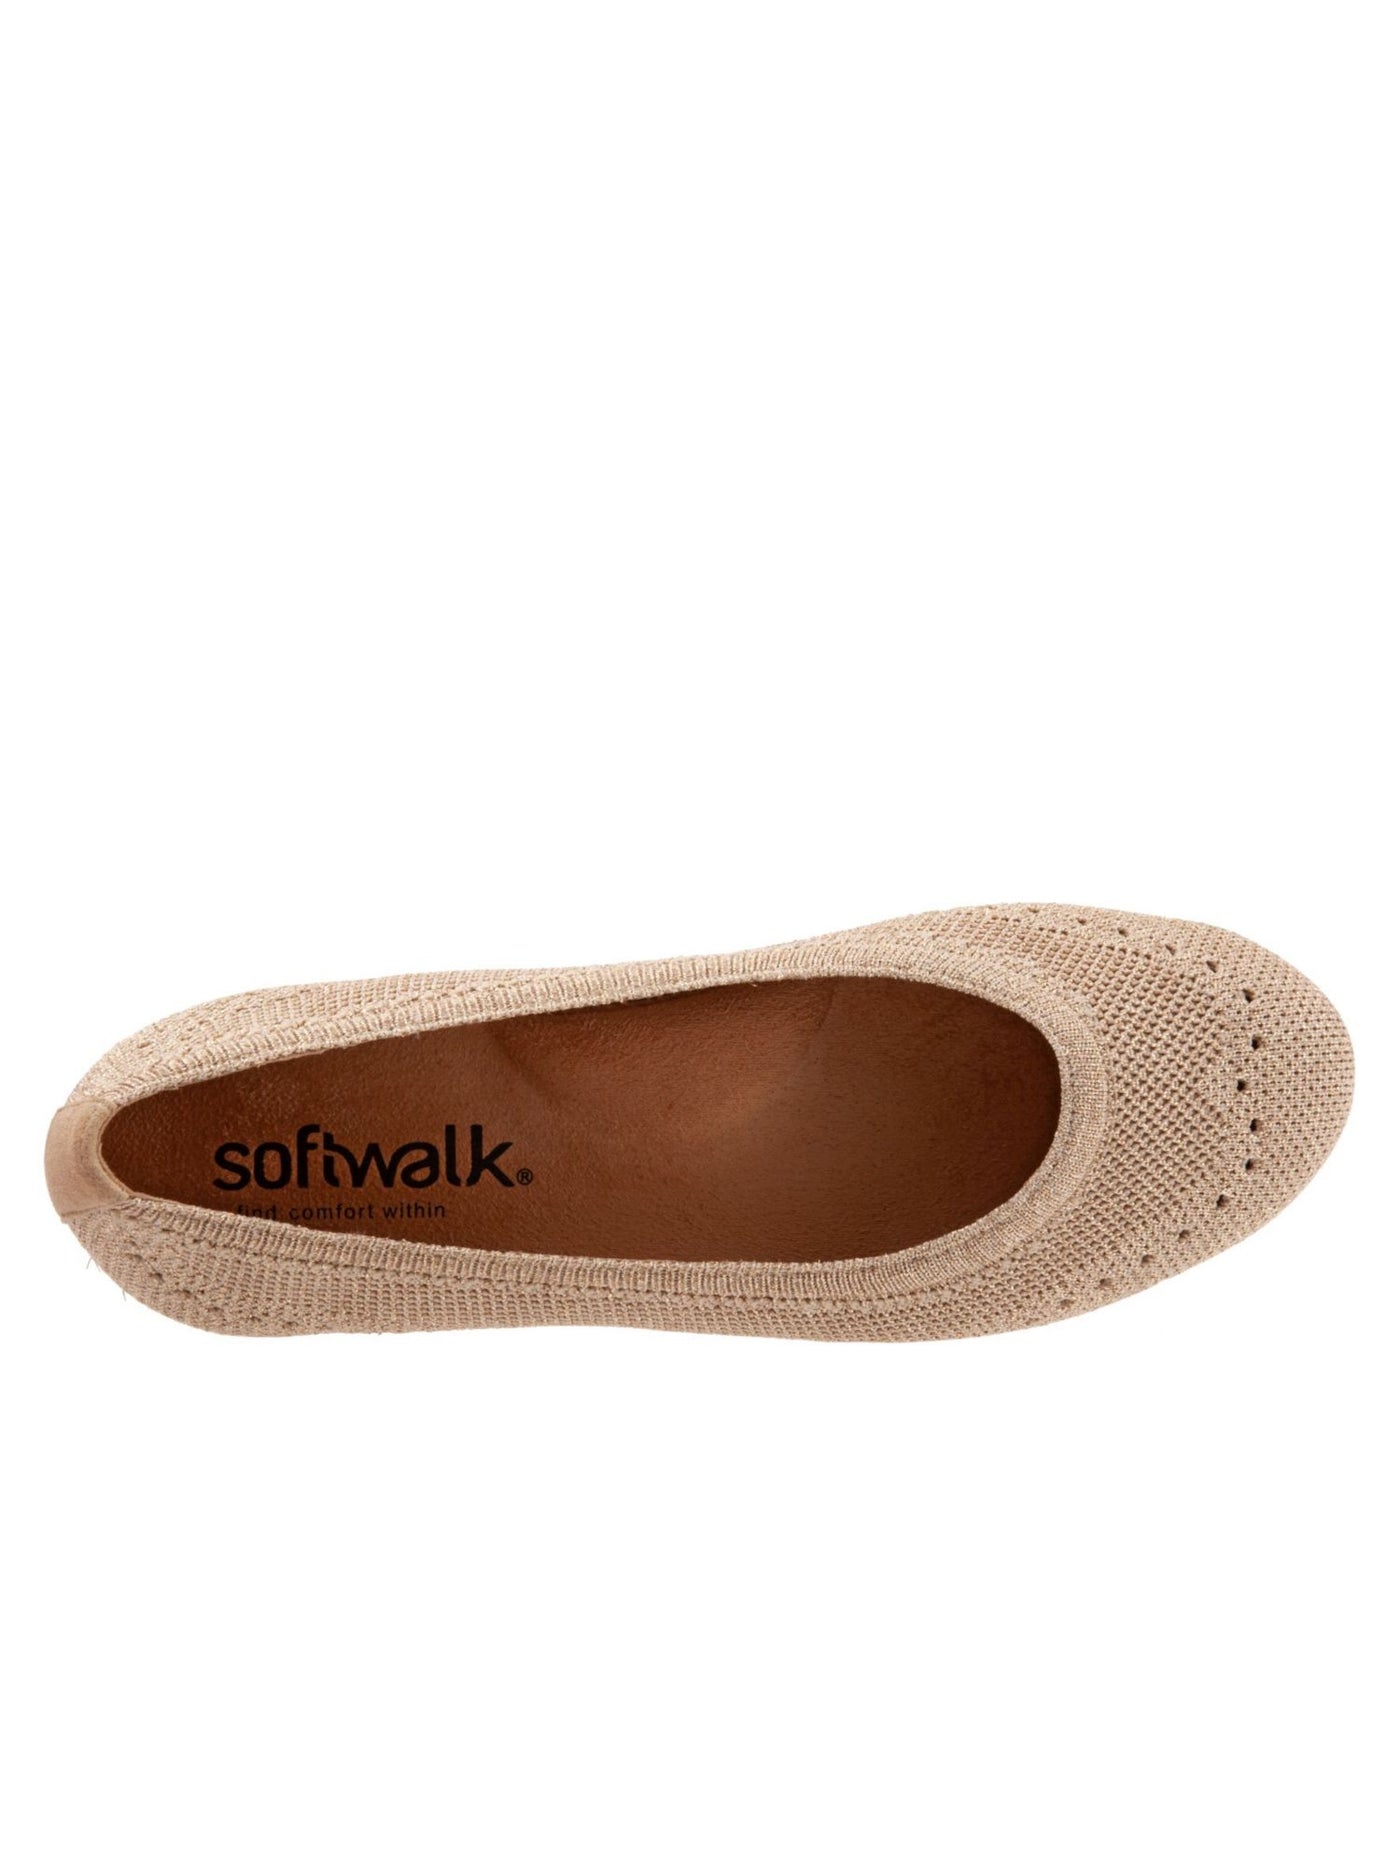 SOFT WALK Womens Gold Knit Removable Insole Breathable Arch Support Cushioned Santorini Round Toe Slip On Ballet Flats 7.5 M